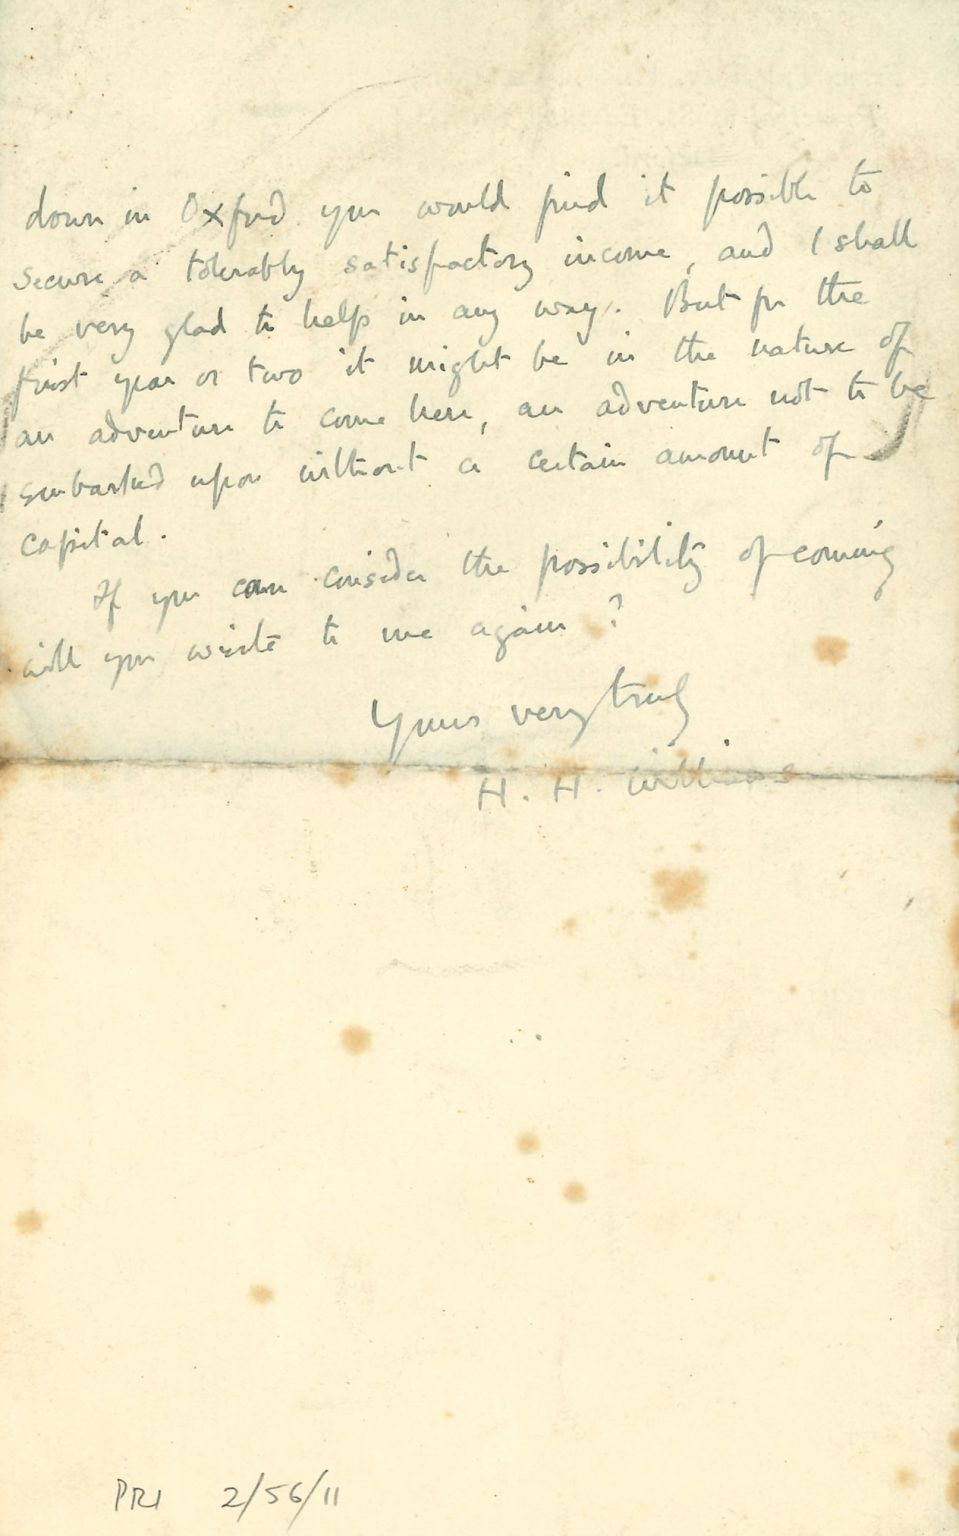 Letter written by Principal Williams inviting Emden to join the Hall - reverse side